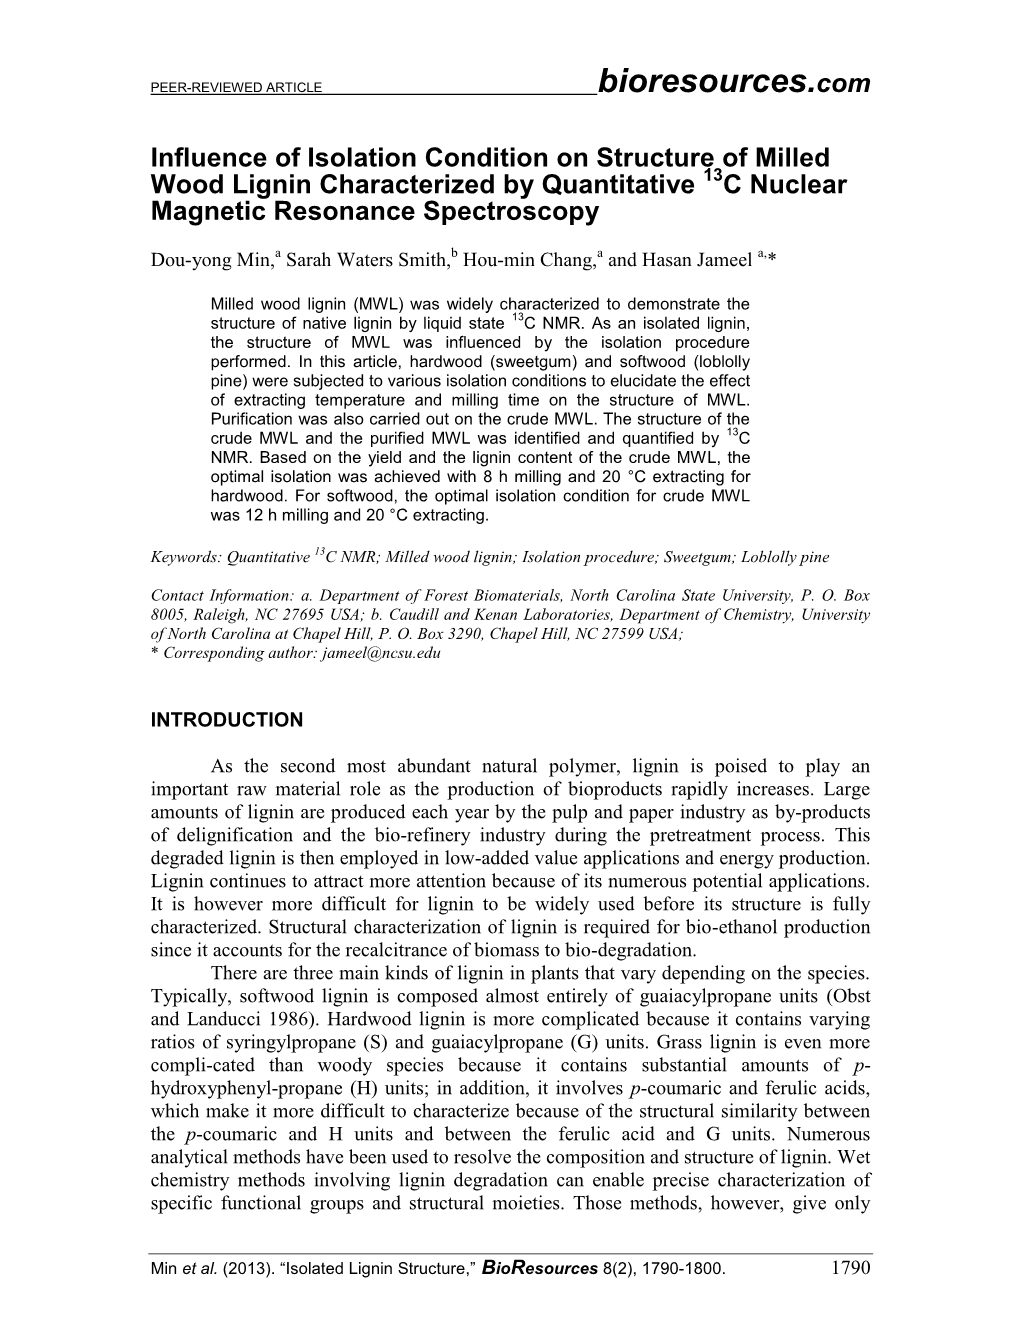 Influence of Isolation Condition on Structure of Milled Wood Lignin Characterized by Quantitative 13C Nuclear Magnetic Resonance Spectroscopy